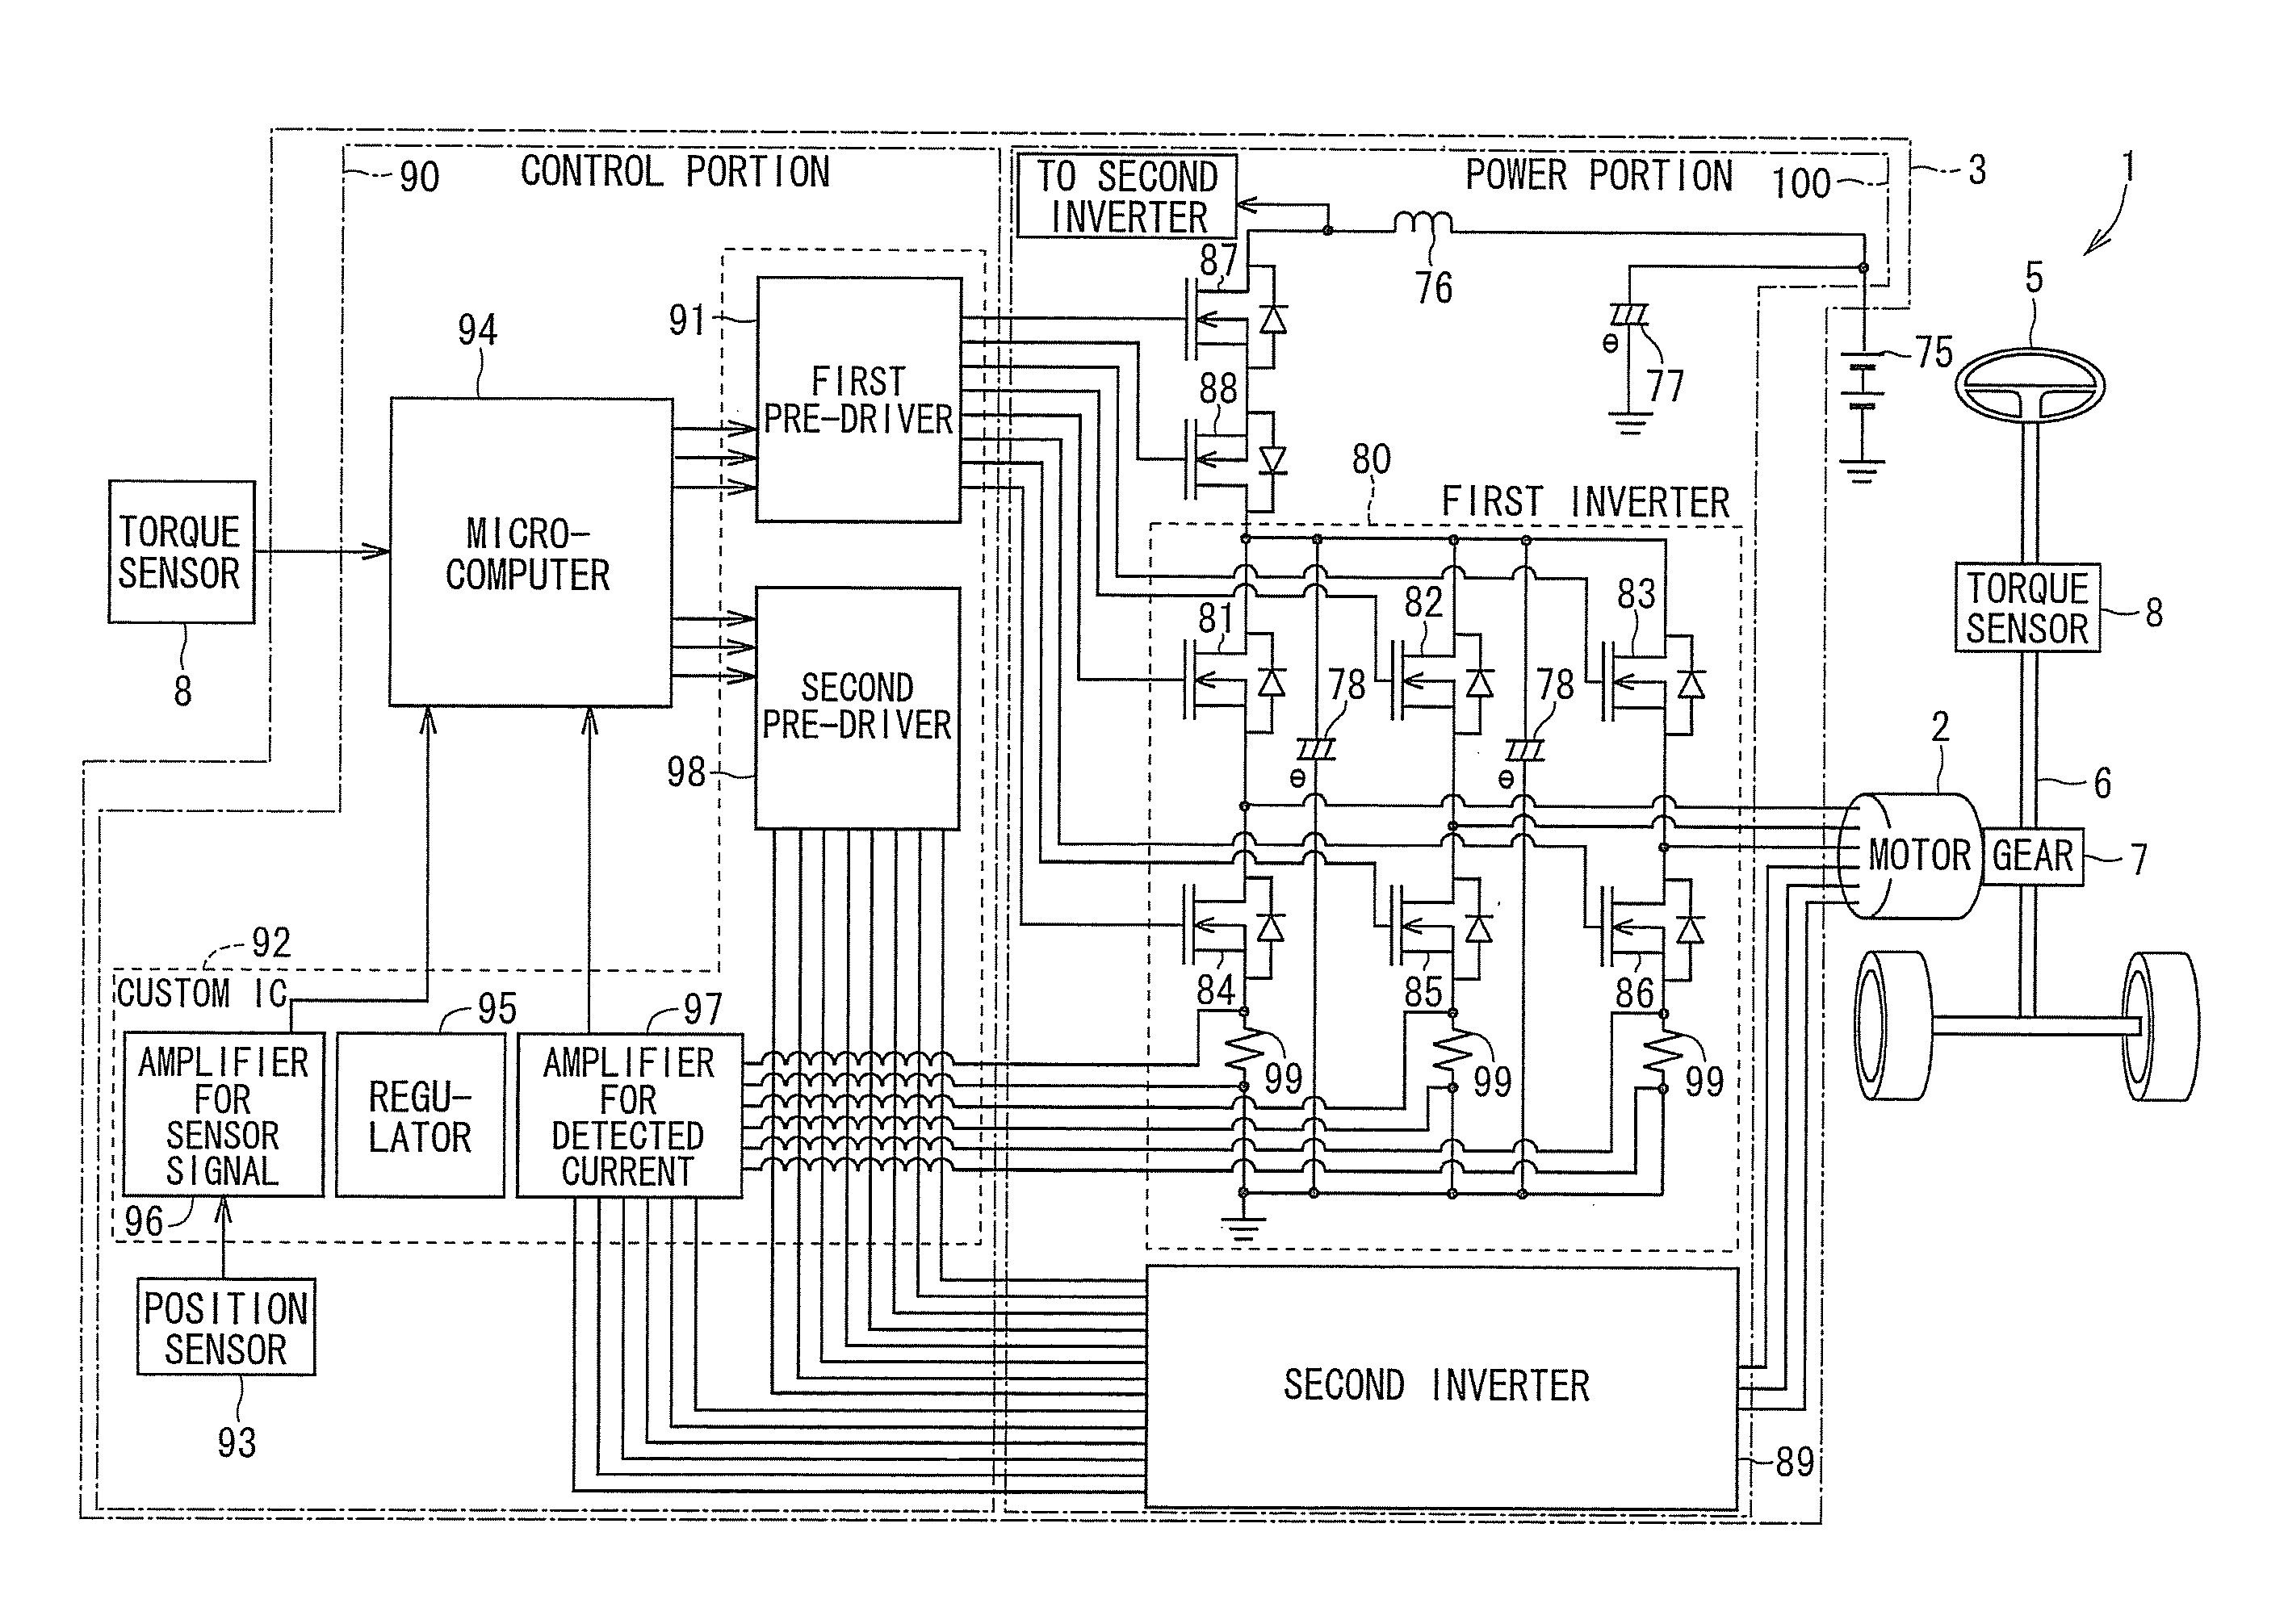 Controller for an electric motor